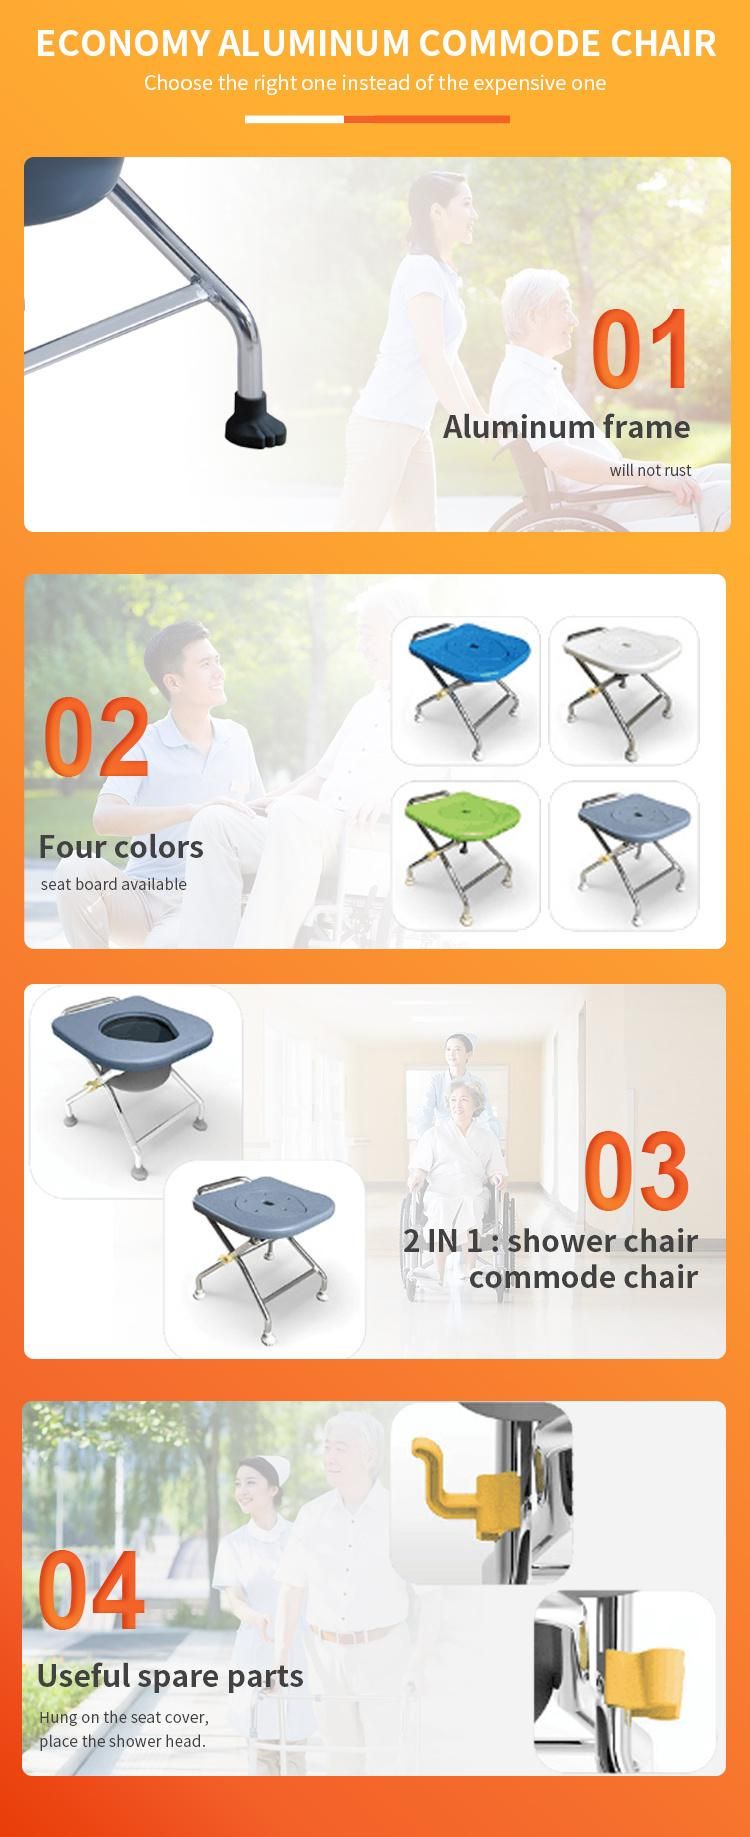 Multifunctional Aluminum Shower Commode Chair with Grey Color Seat Board Easy Carry Commode 3PCS One Box Commode 2 Function in 1 Save Space Chair